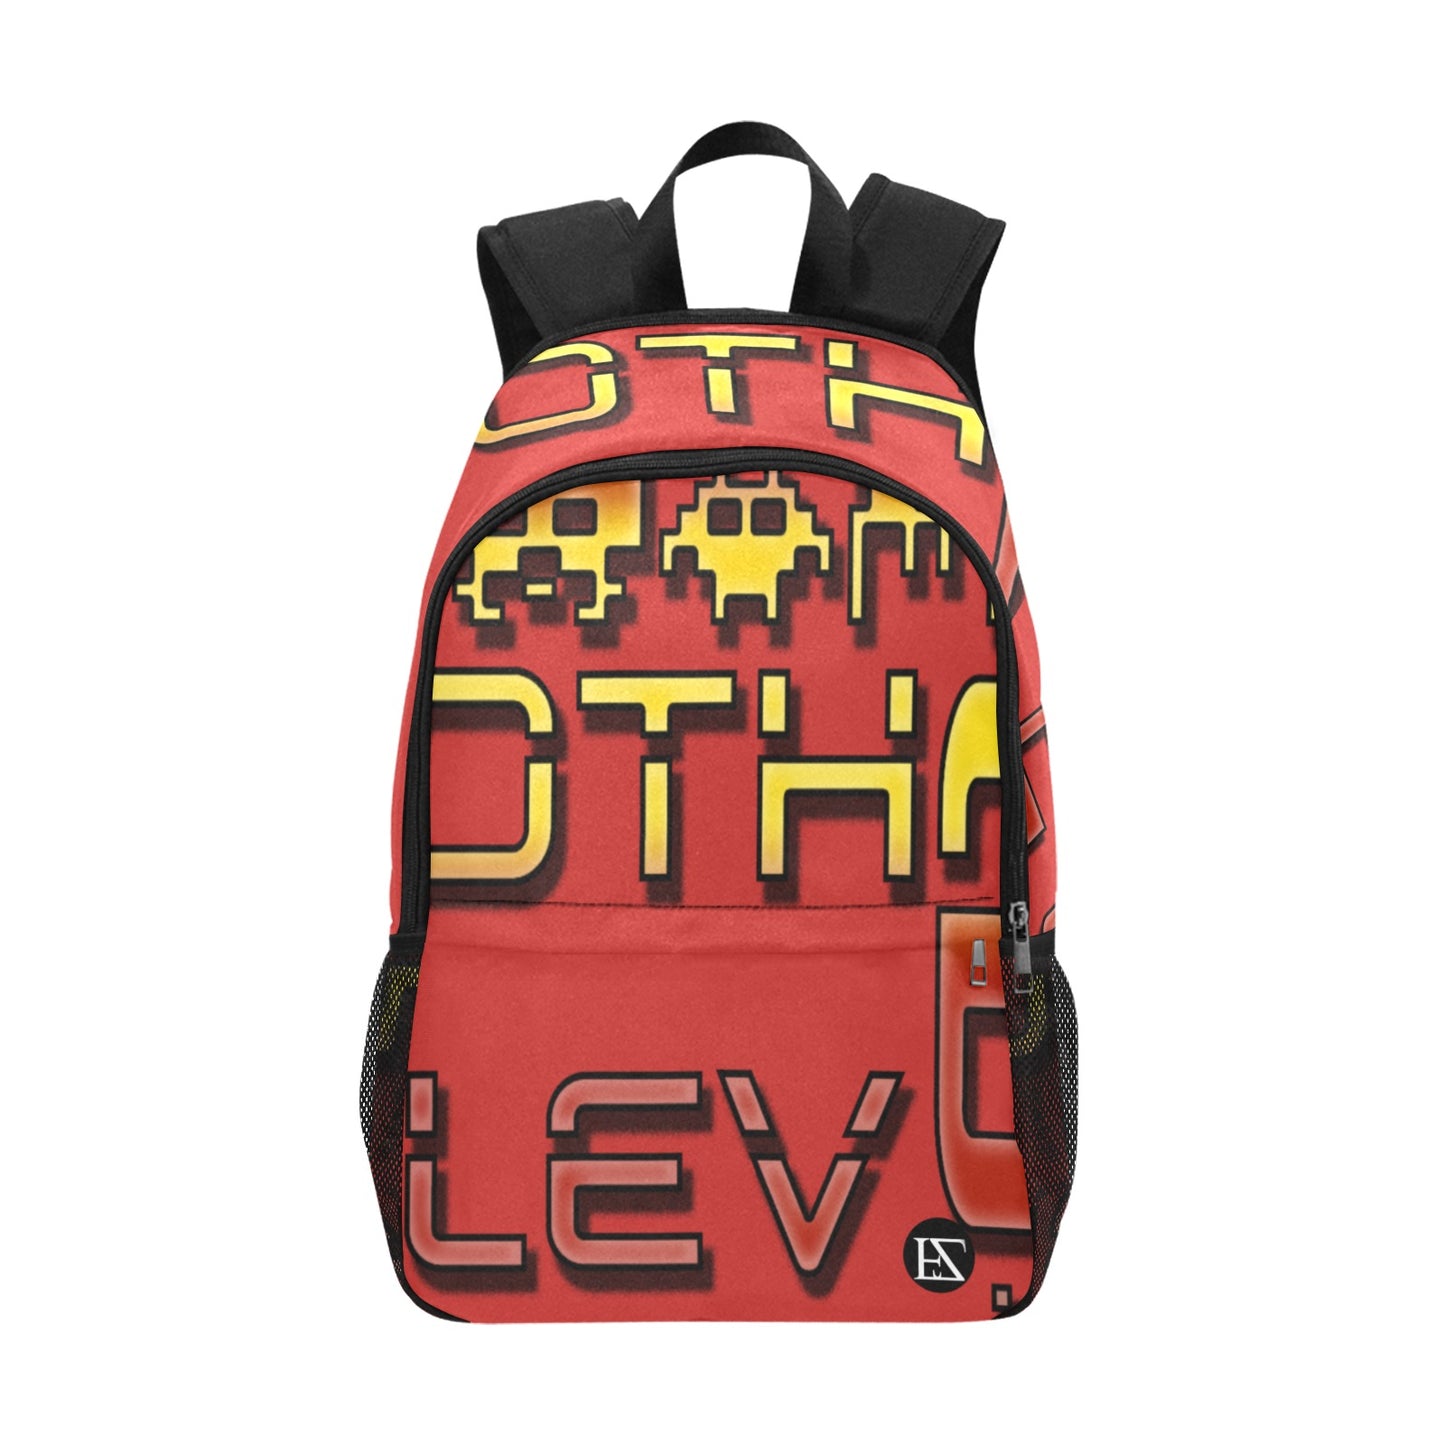 fz red levels backpack one size / fz levels backpack - red all-over print unisex casual backpack with side mesh pockets (model 1659)